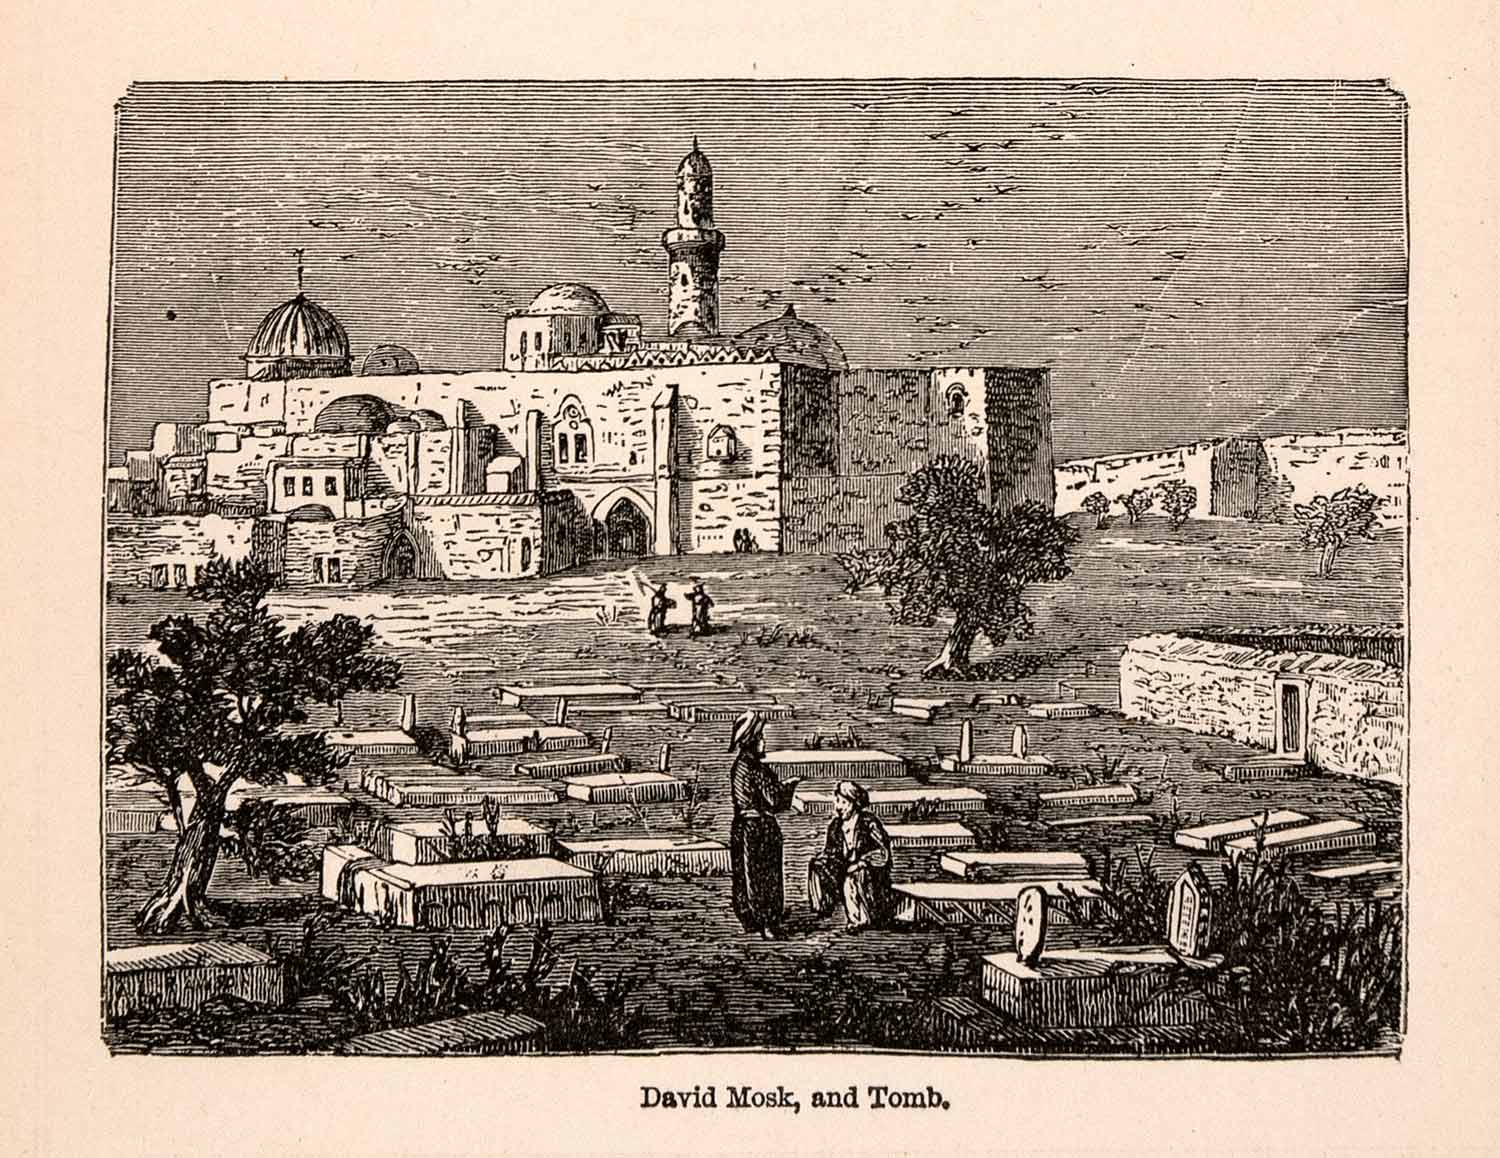 1873 Wood Engraving David Mosk Mosque Tomb Religion Landscape Cemetery XGBA2